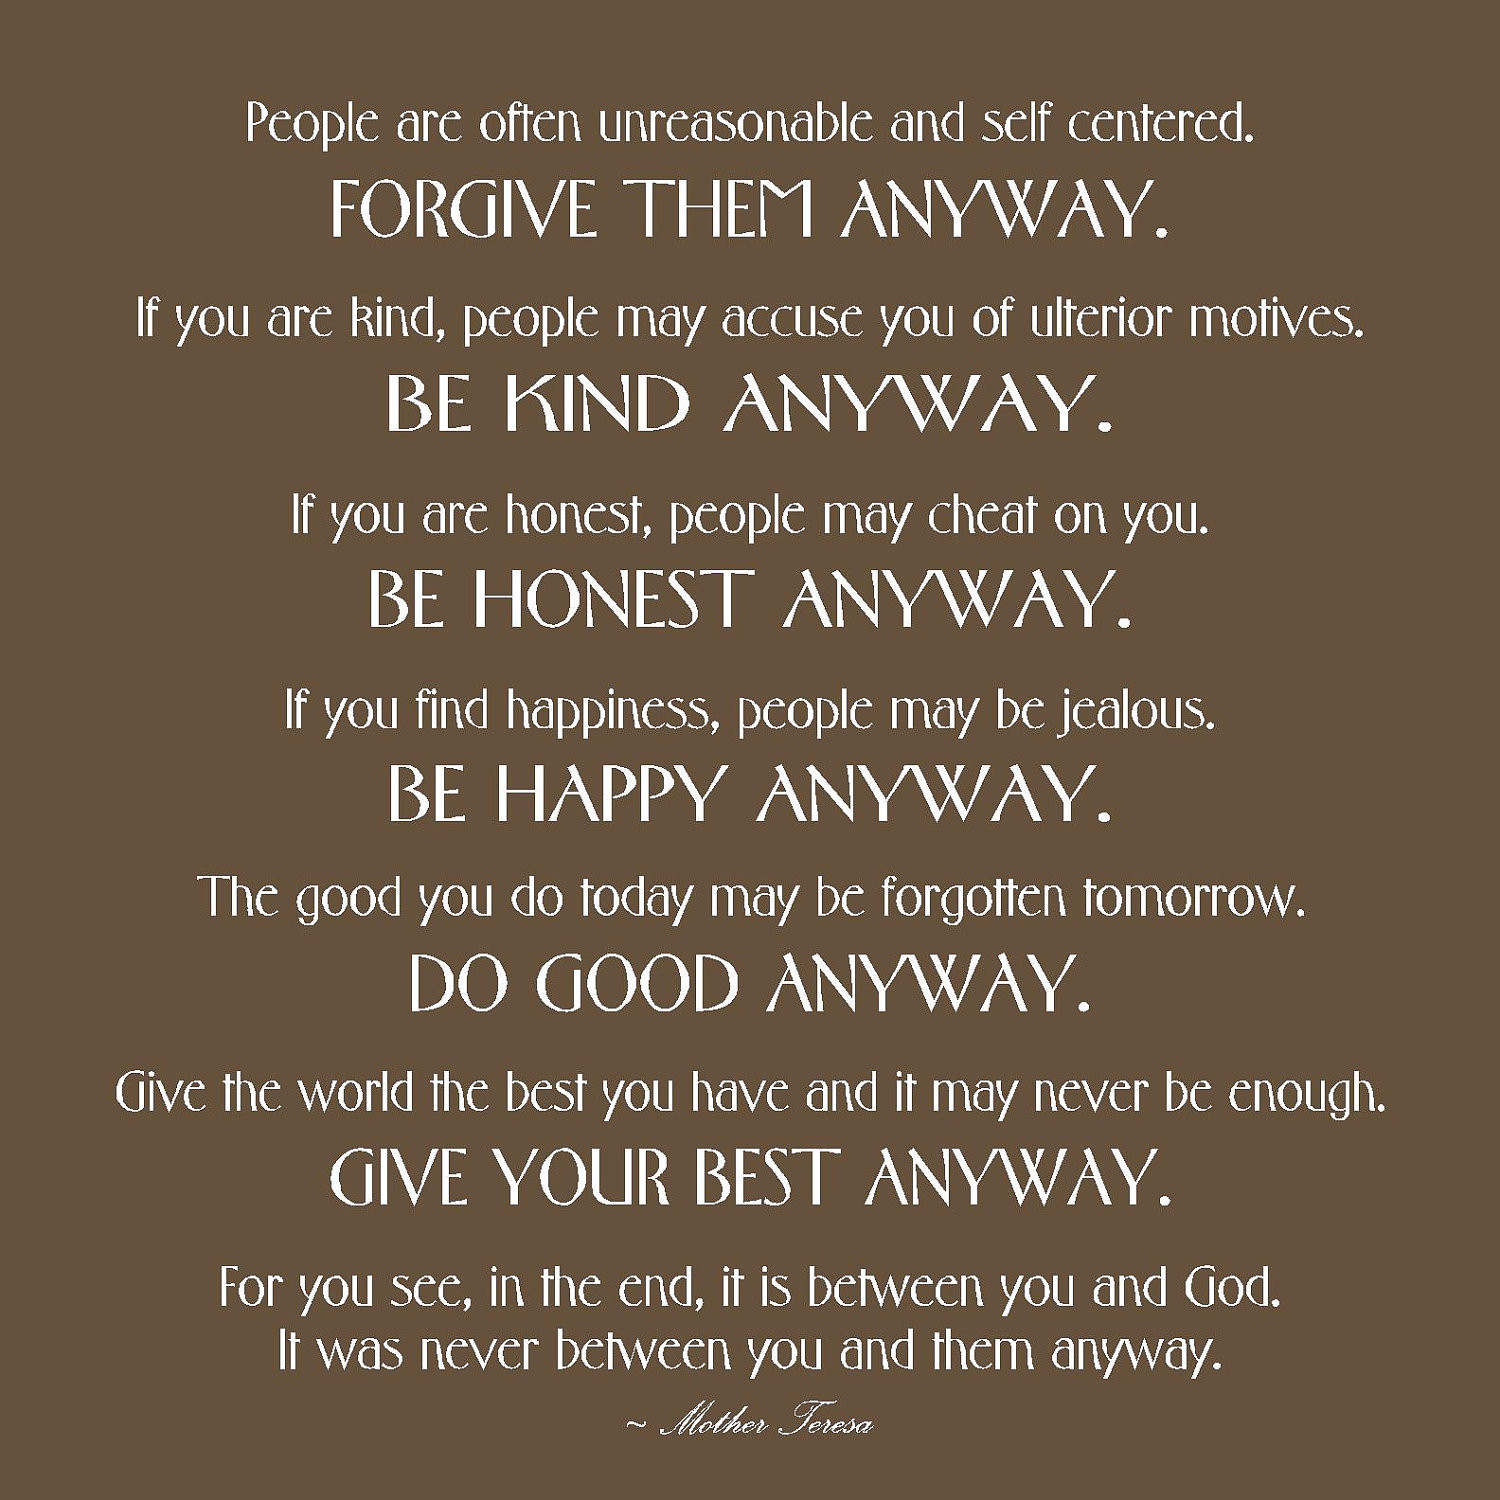 Mother Teresa Inspirational Quotes
 Lessons in Life by Mother Teresa